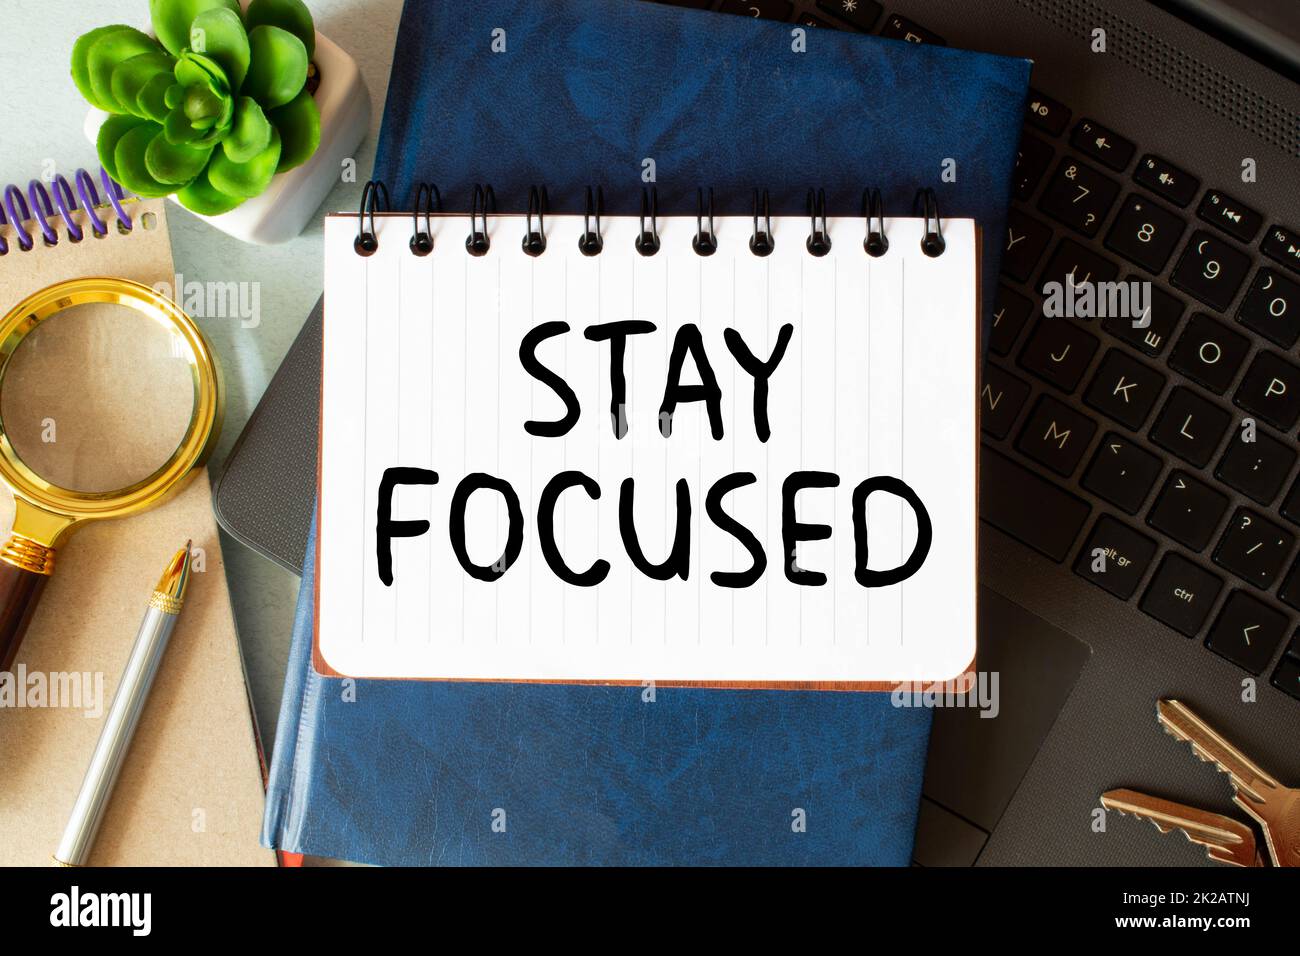 STAY FOCUSED man hand notebook and other office equipment such as computer keyboard. Stock Photo